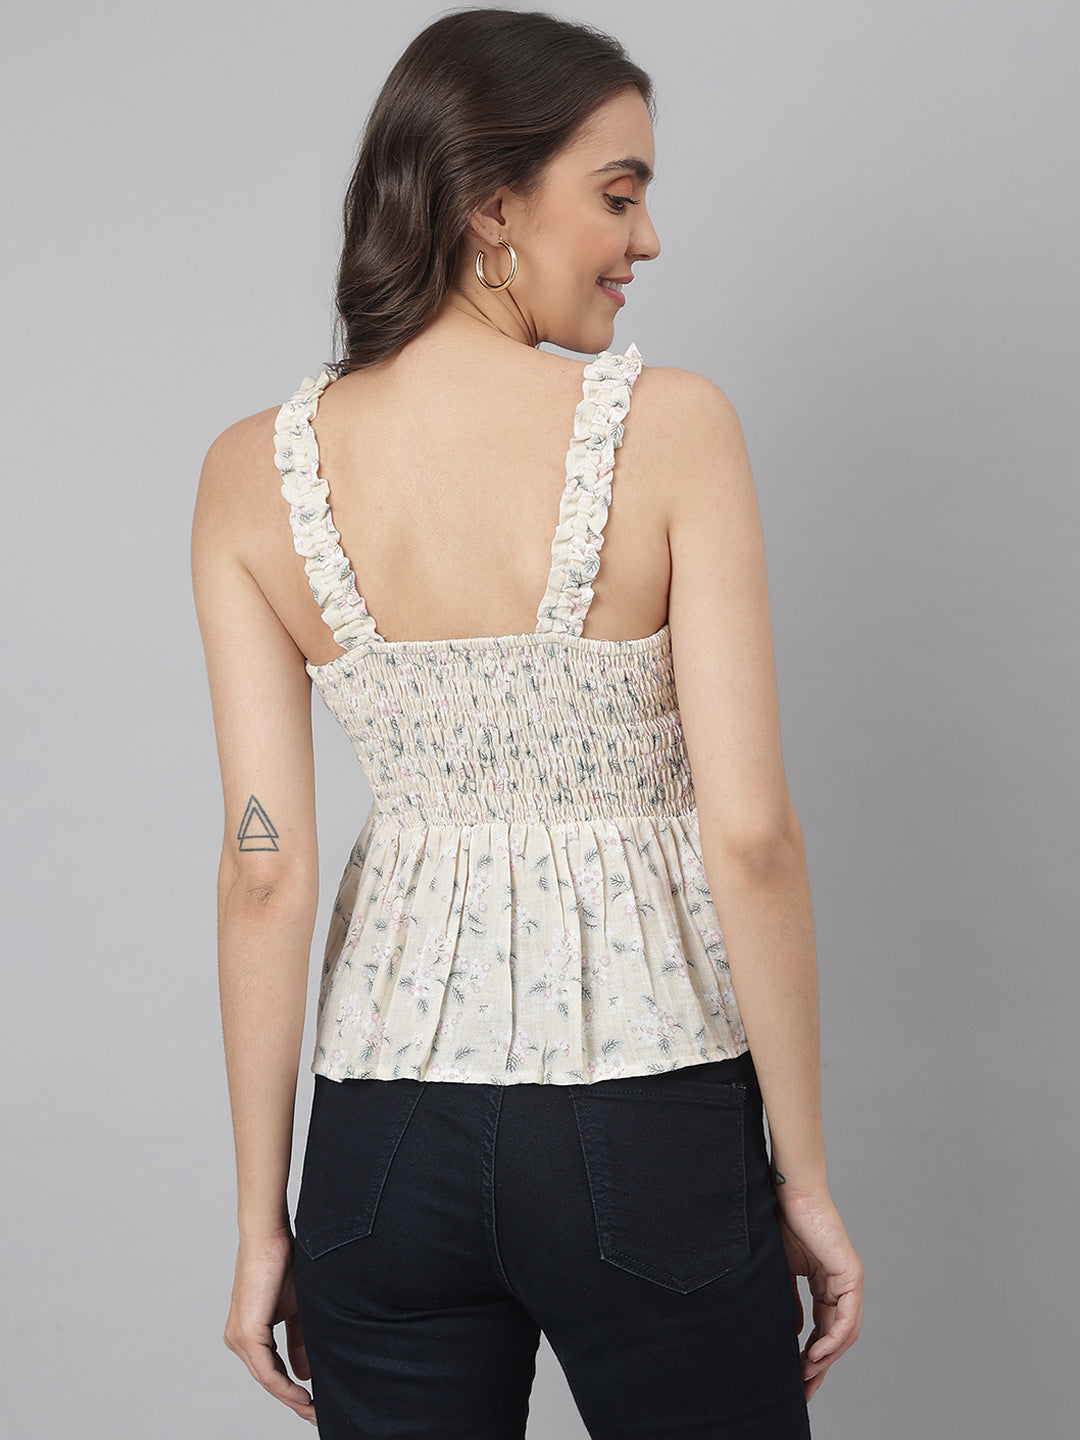 Fawn Cut Sleeve Stylish Top With Elasticated Back for An Ideal Fit